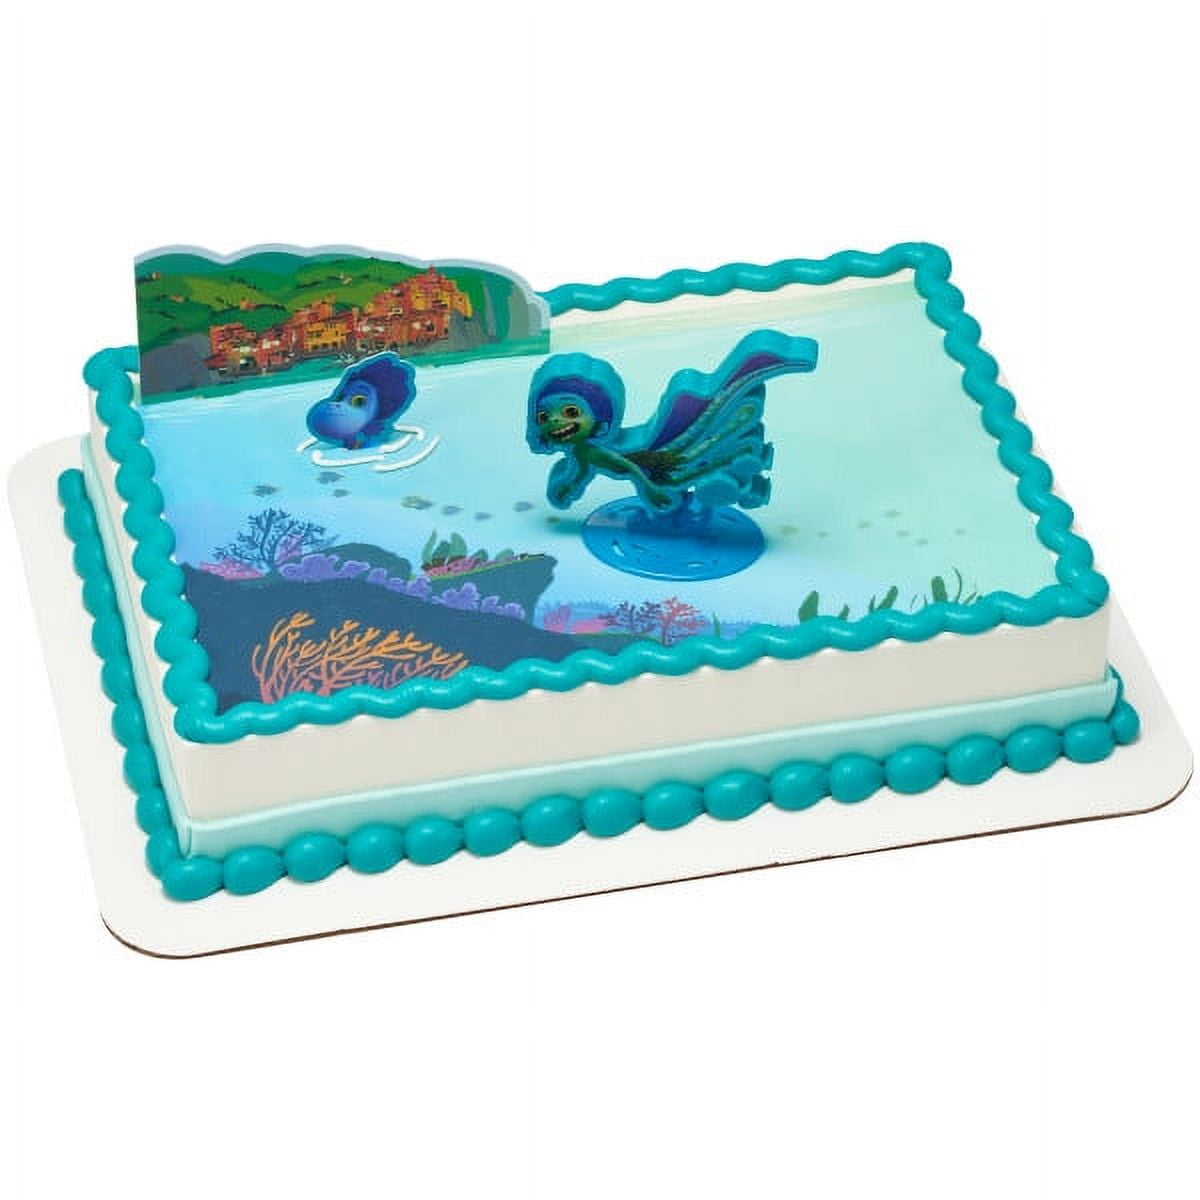 Disney/Pixar Luca the World Is Yours DecoSet and Edible Image Cake Topper  Background (1/4 Sheet)